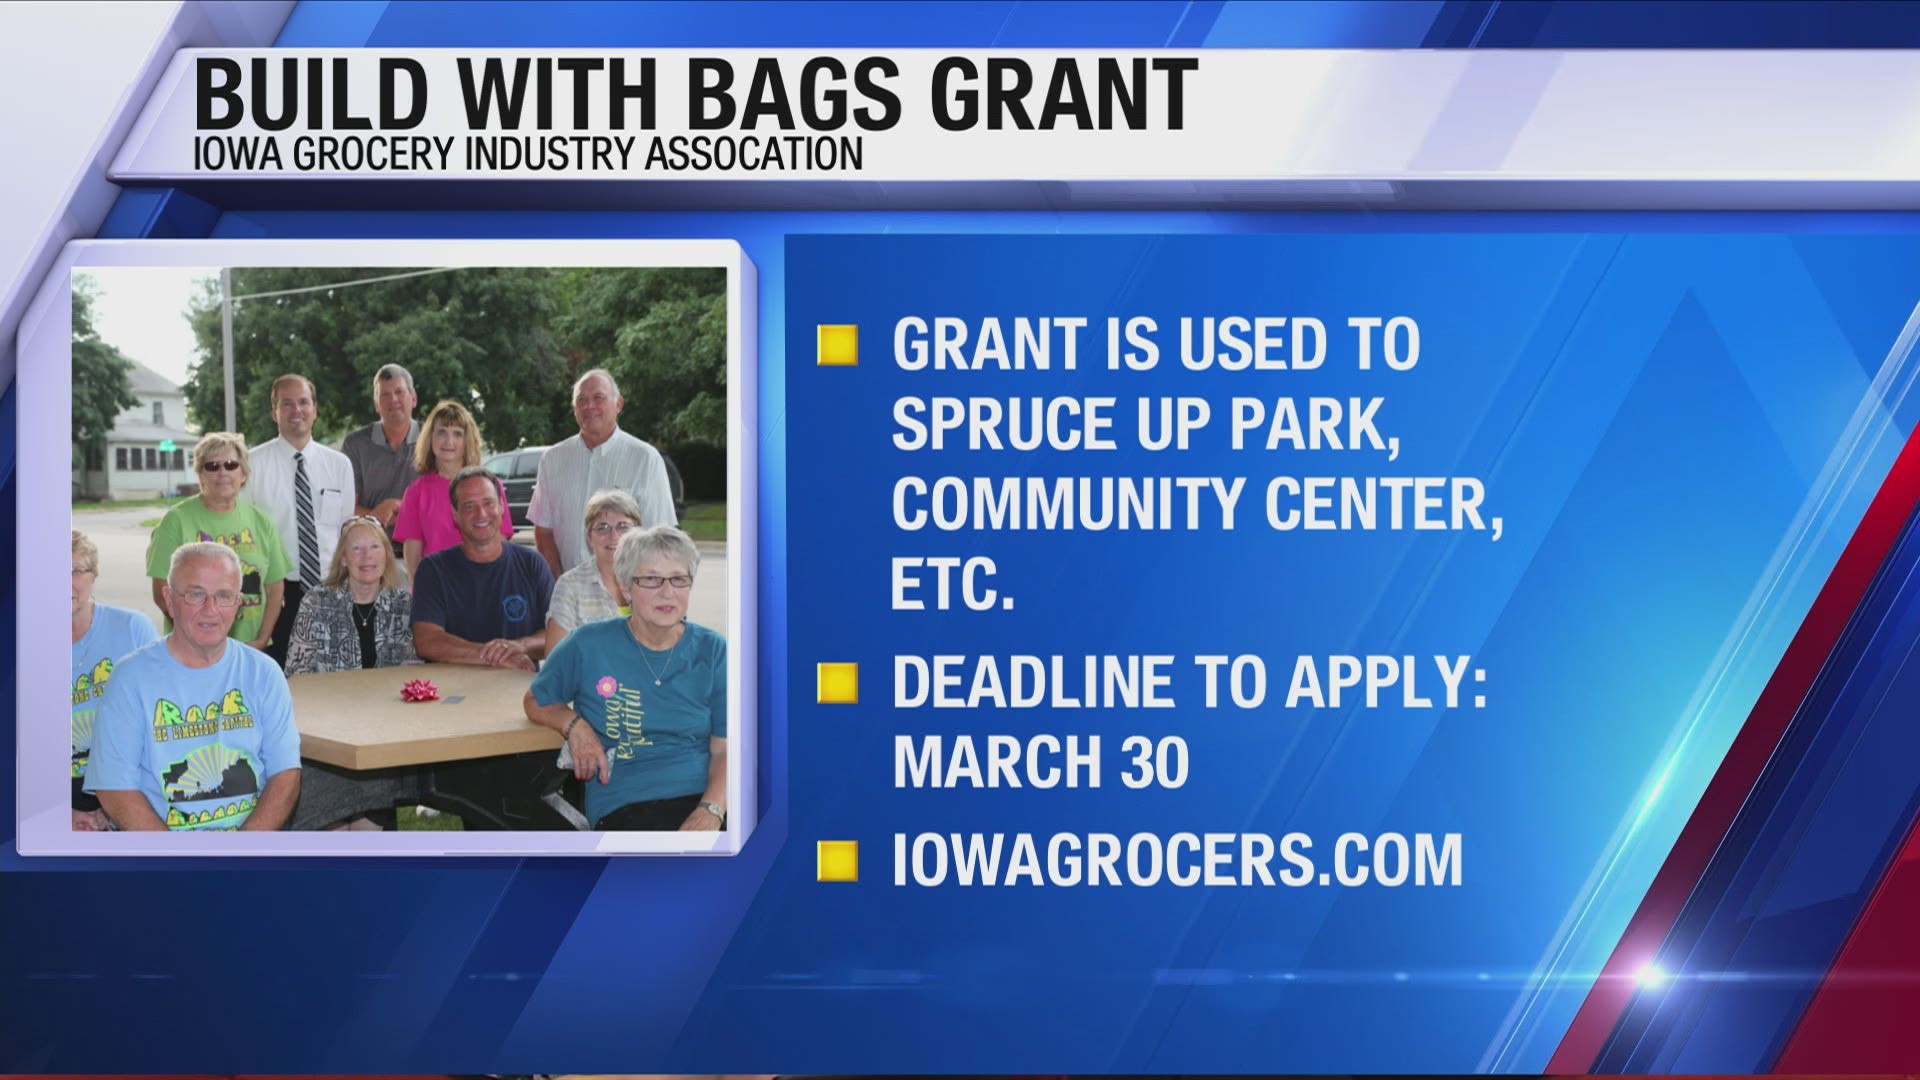 Apply for the grant by March 30